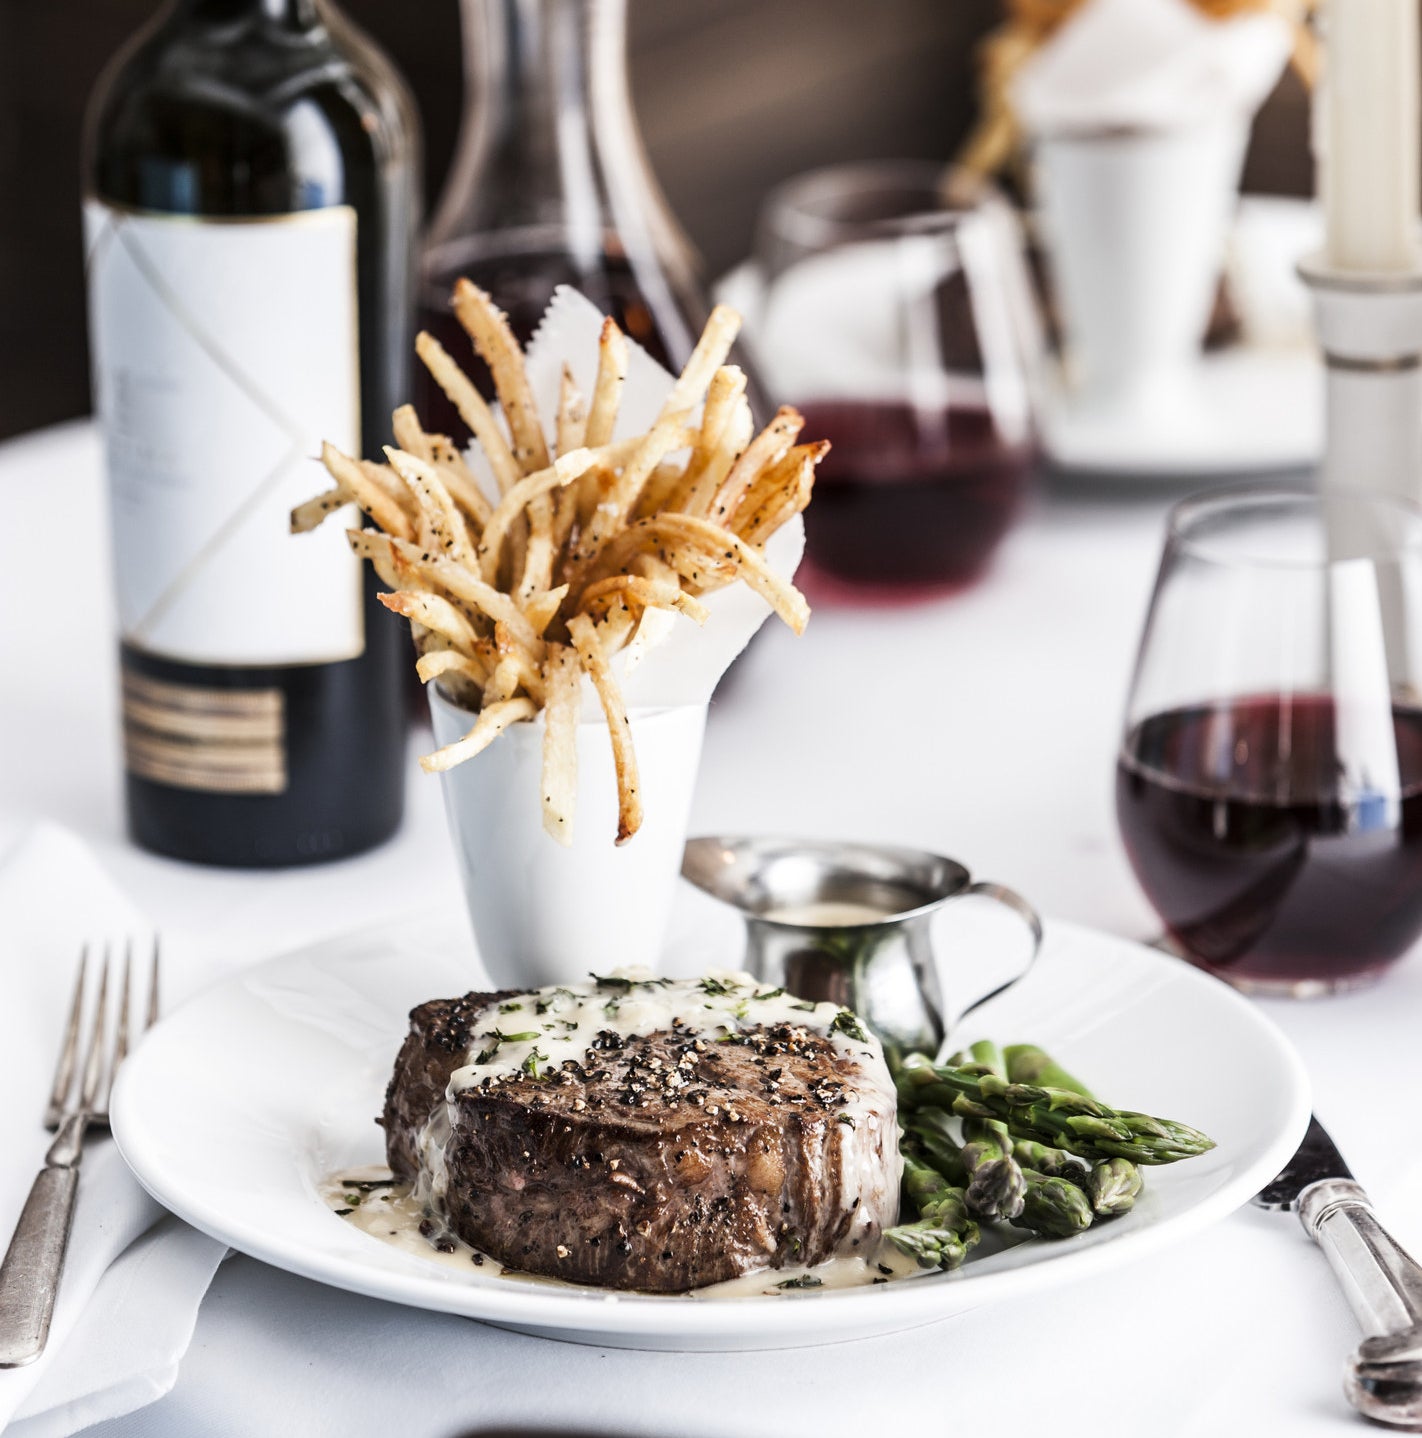 steak with sauce, fries, asparagus and wine